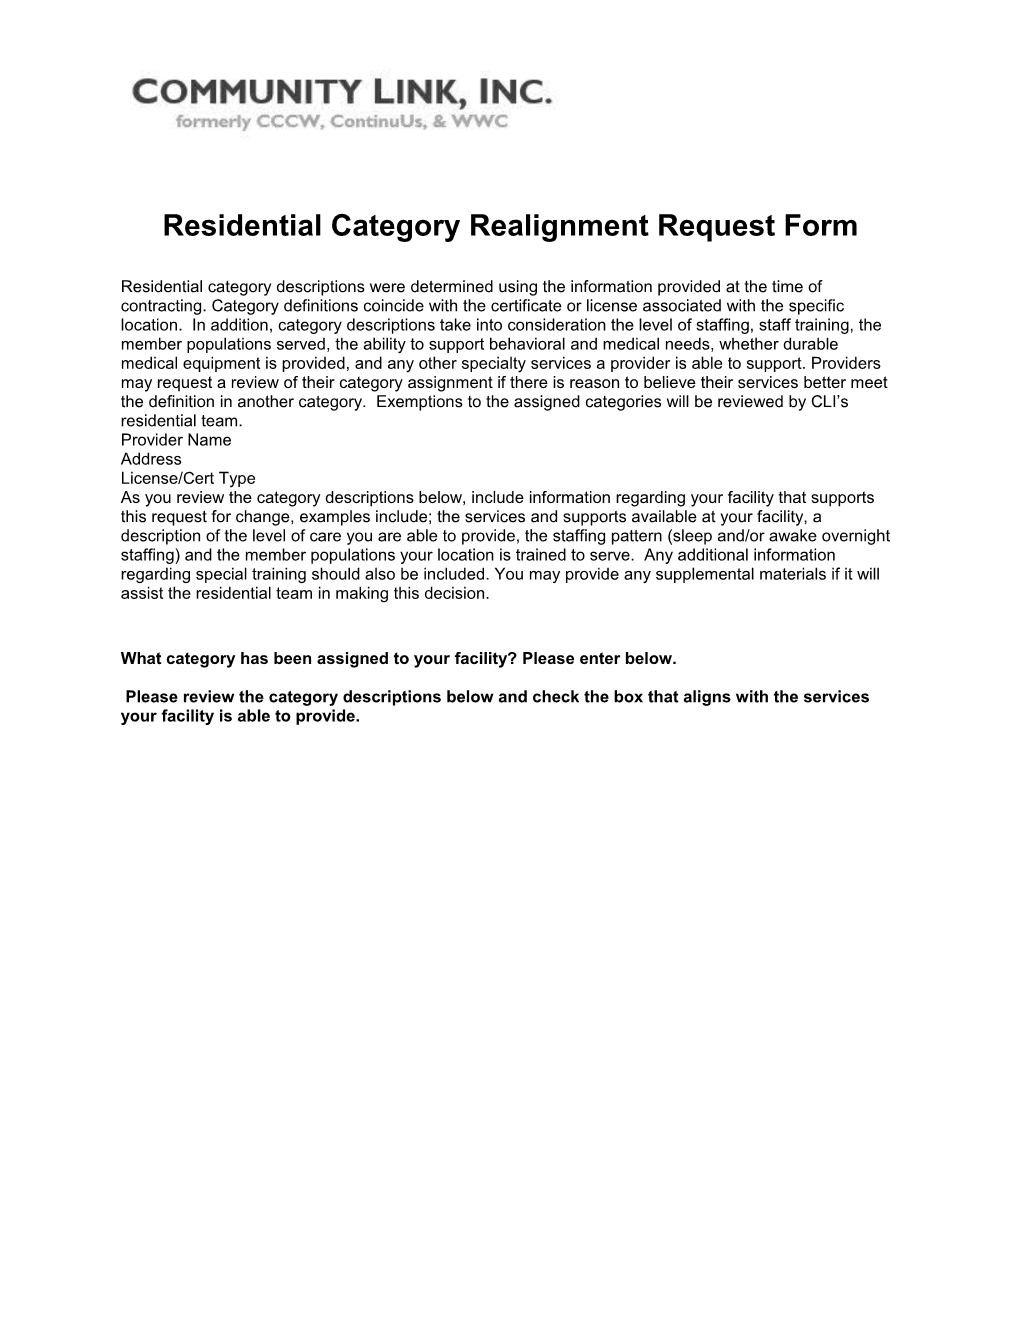 Residential Categoryrealignmentrequest Form